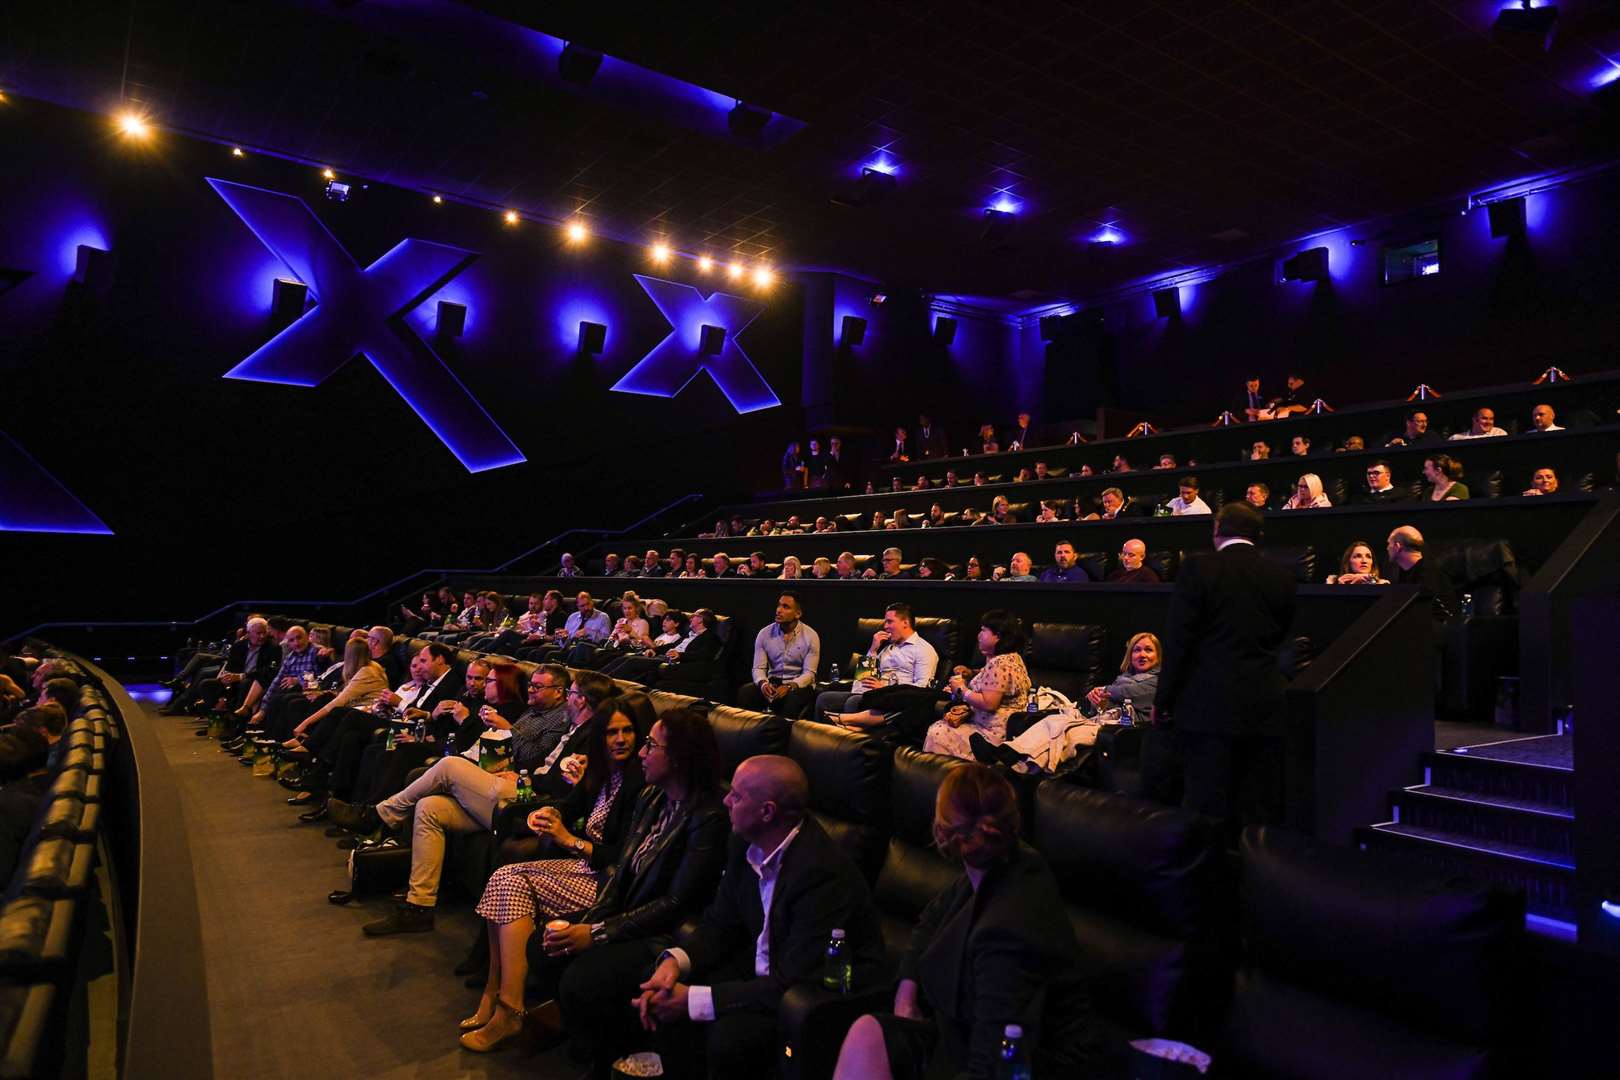 The Showcase Cinema in Bluewater is a popular destination